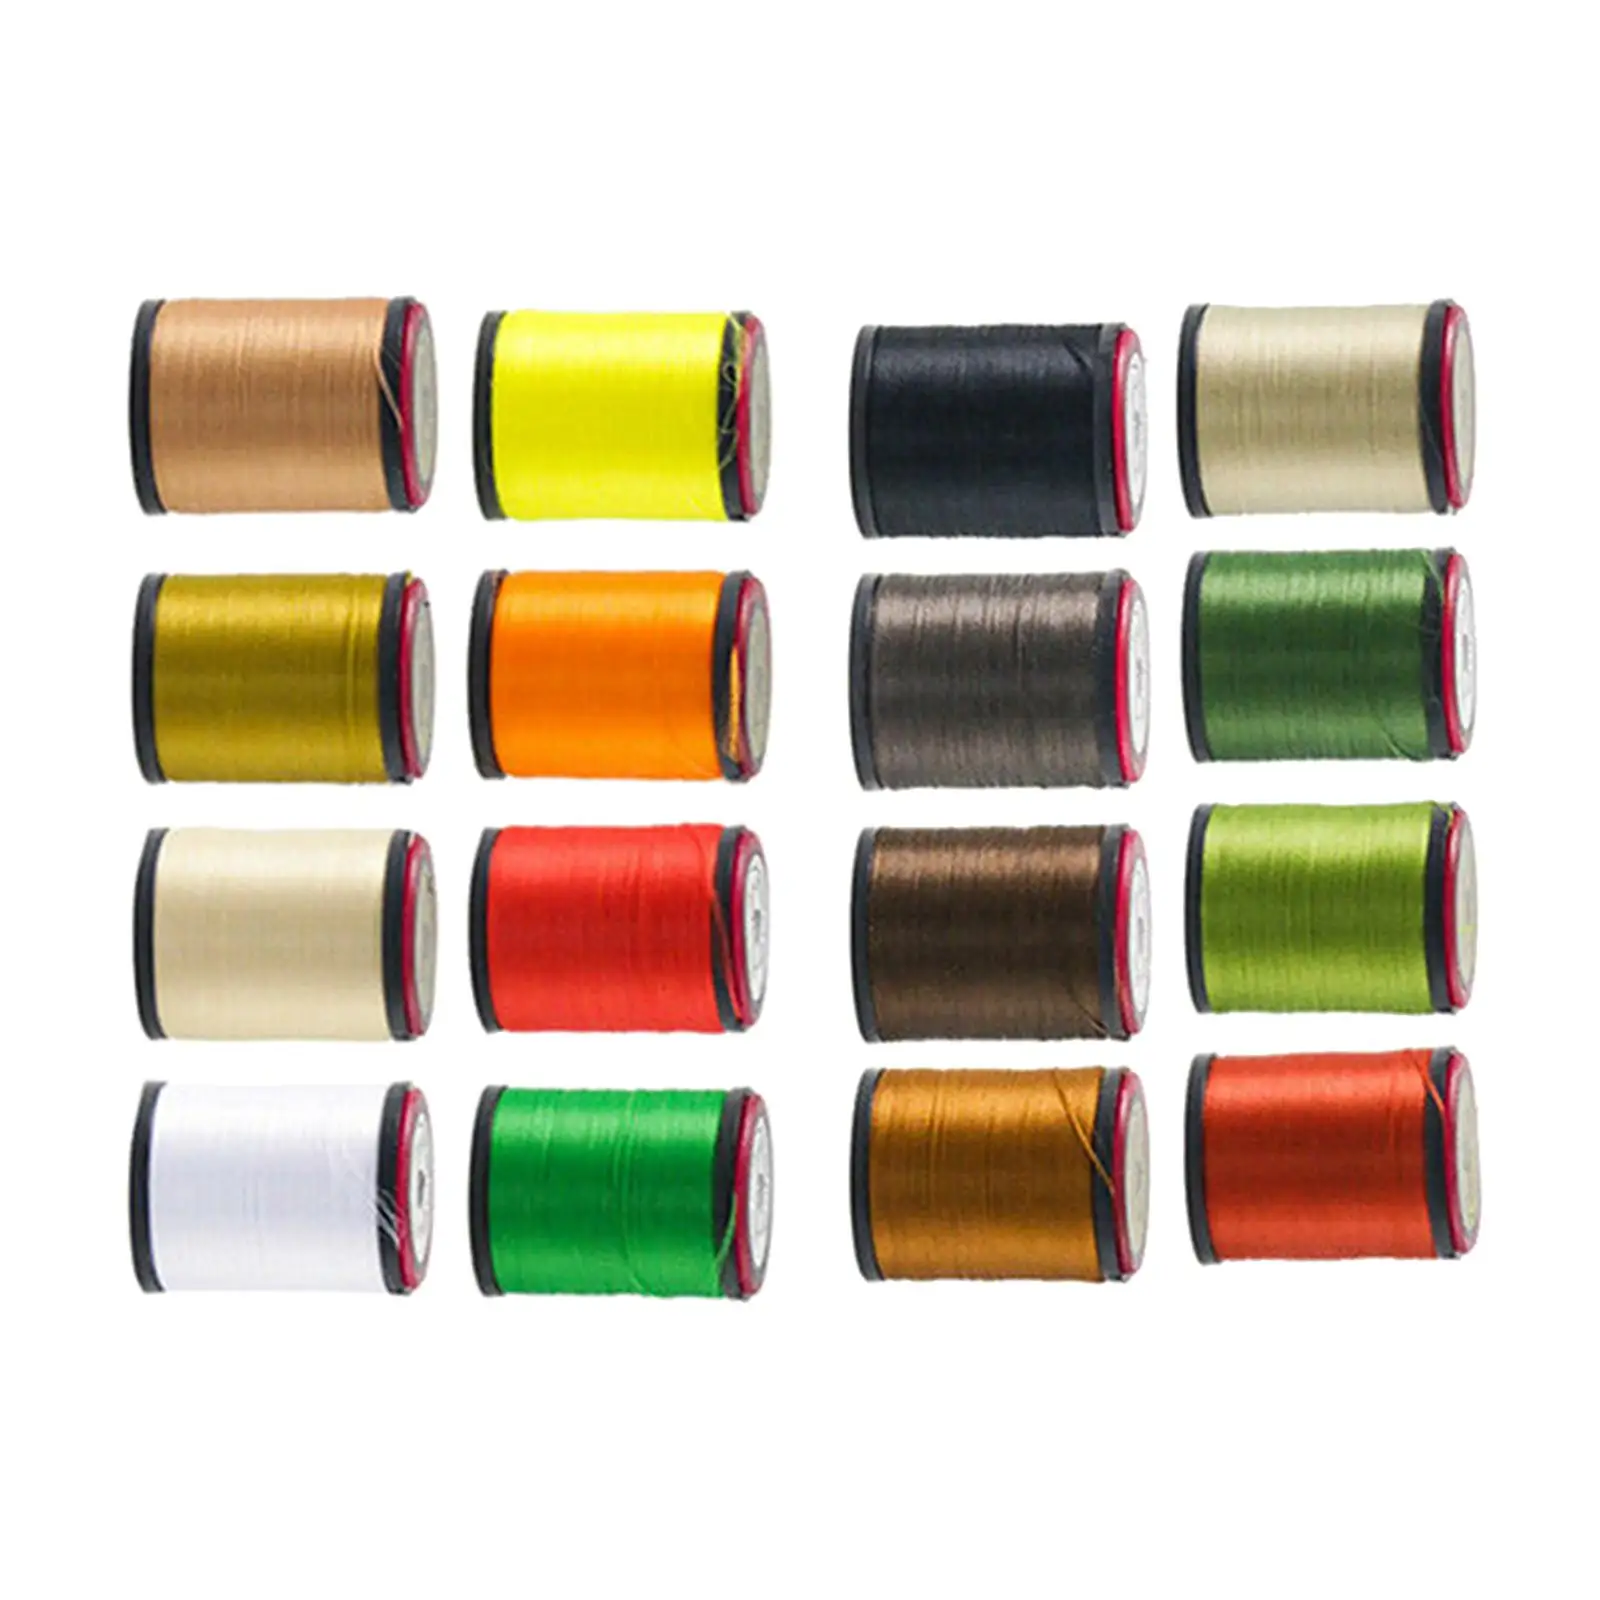  Fly Tying Kit, Fly Tying Materials 8 Color Fly Tying Thread Elastic Fly